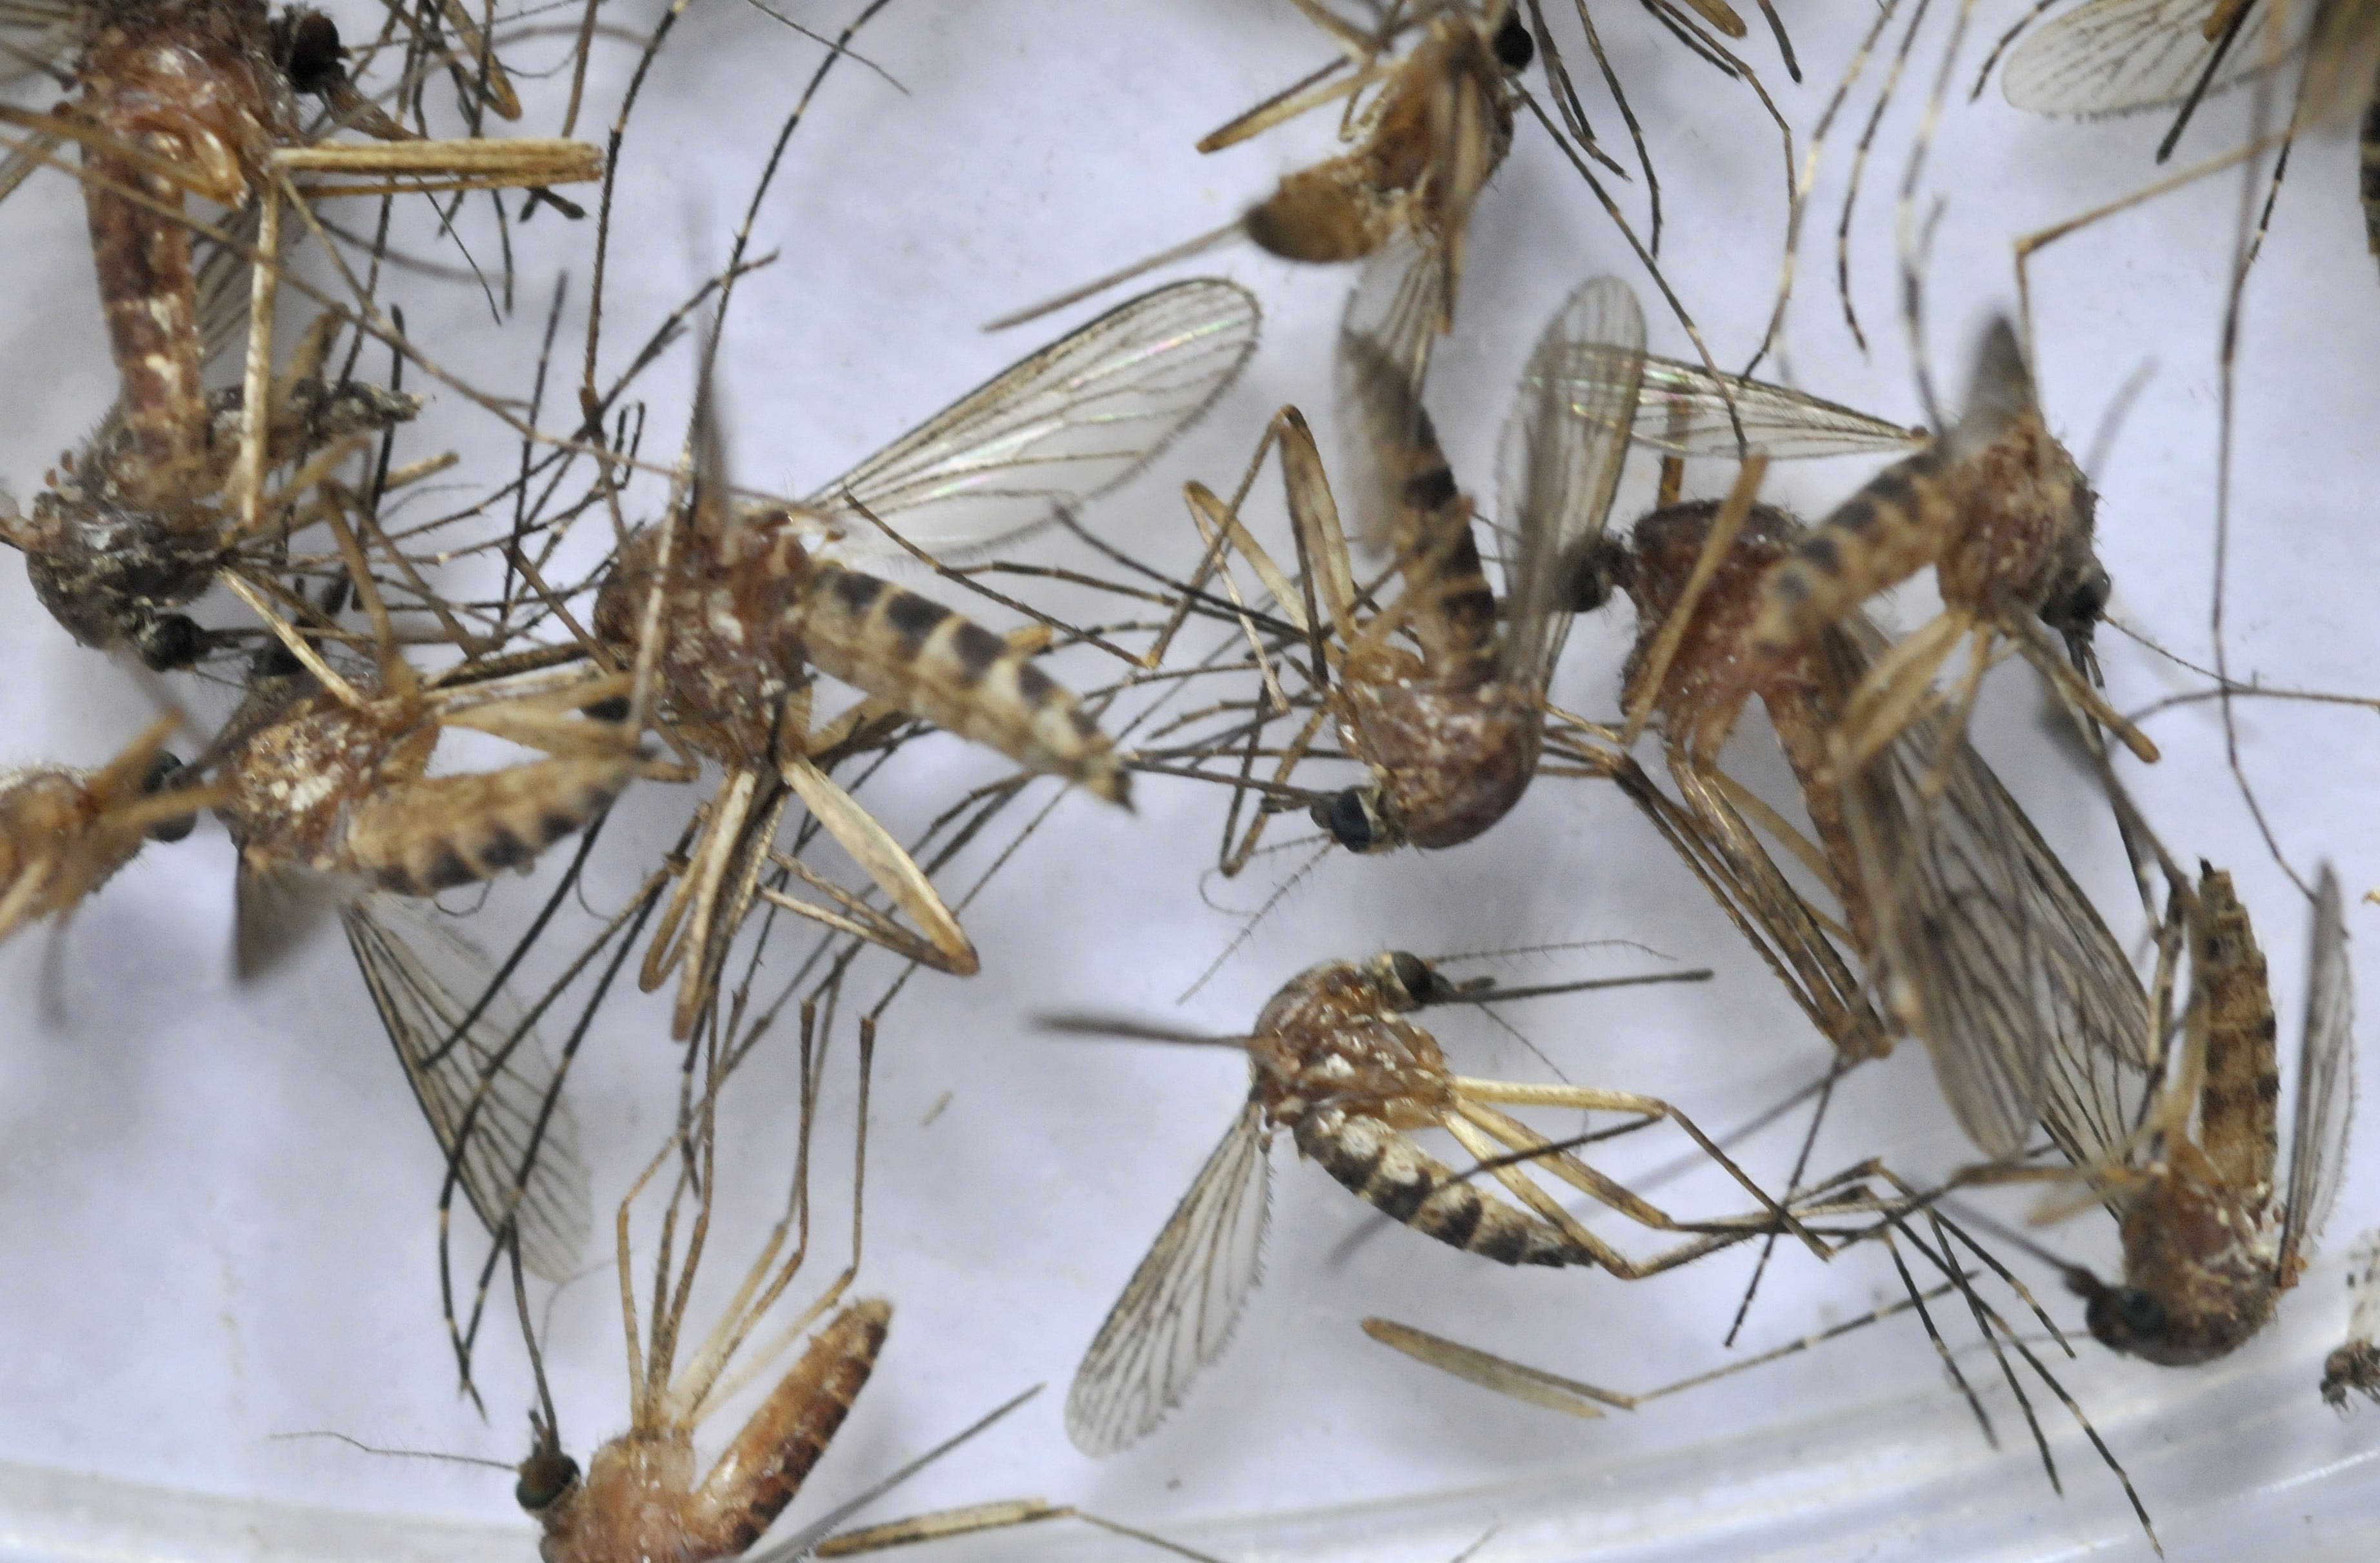 EEE found in Barnstable mosquitoes. It's the second case in Mass. this summer.